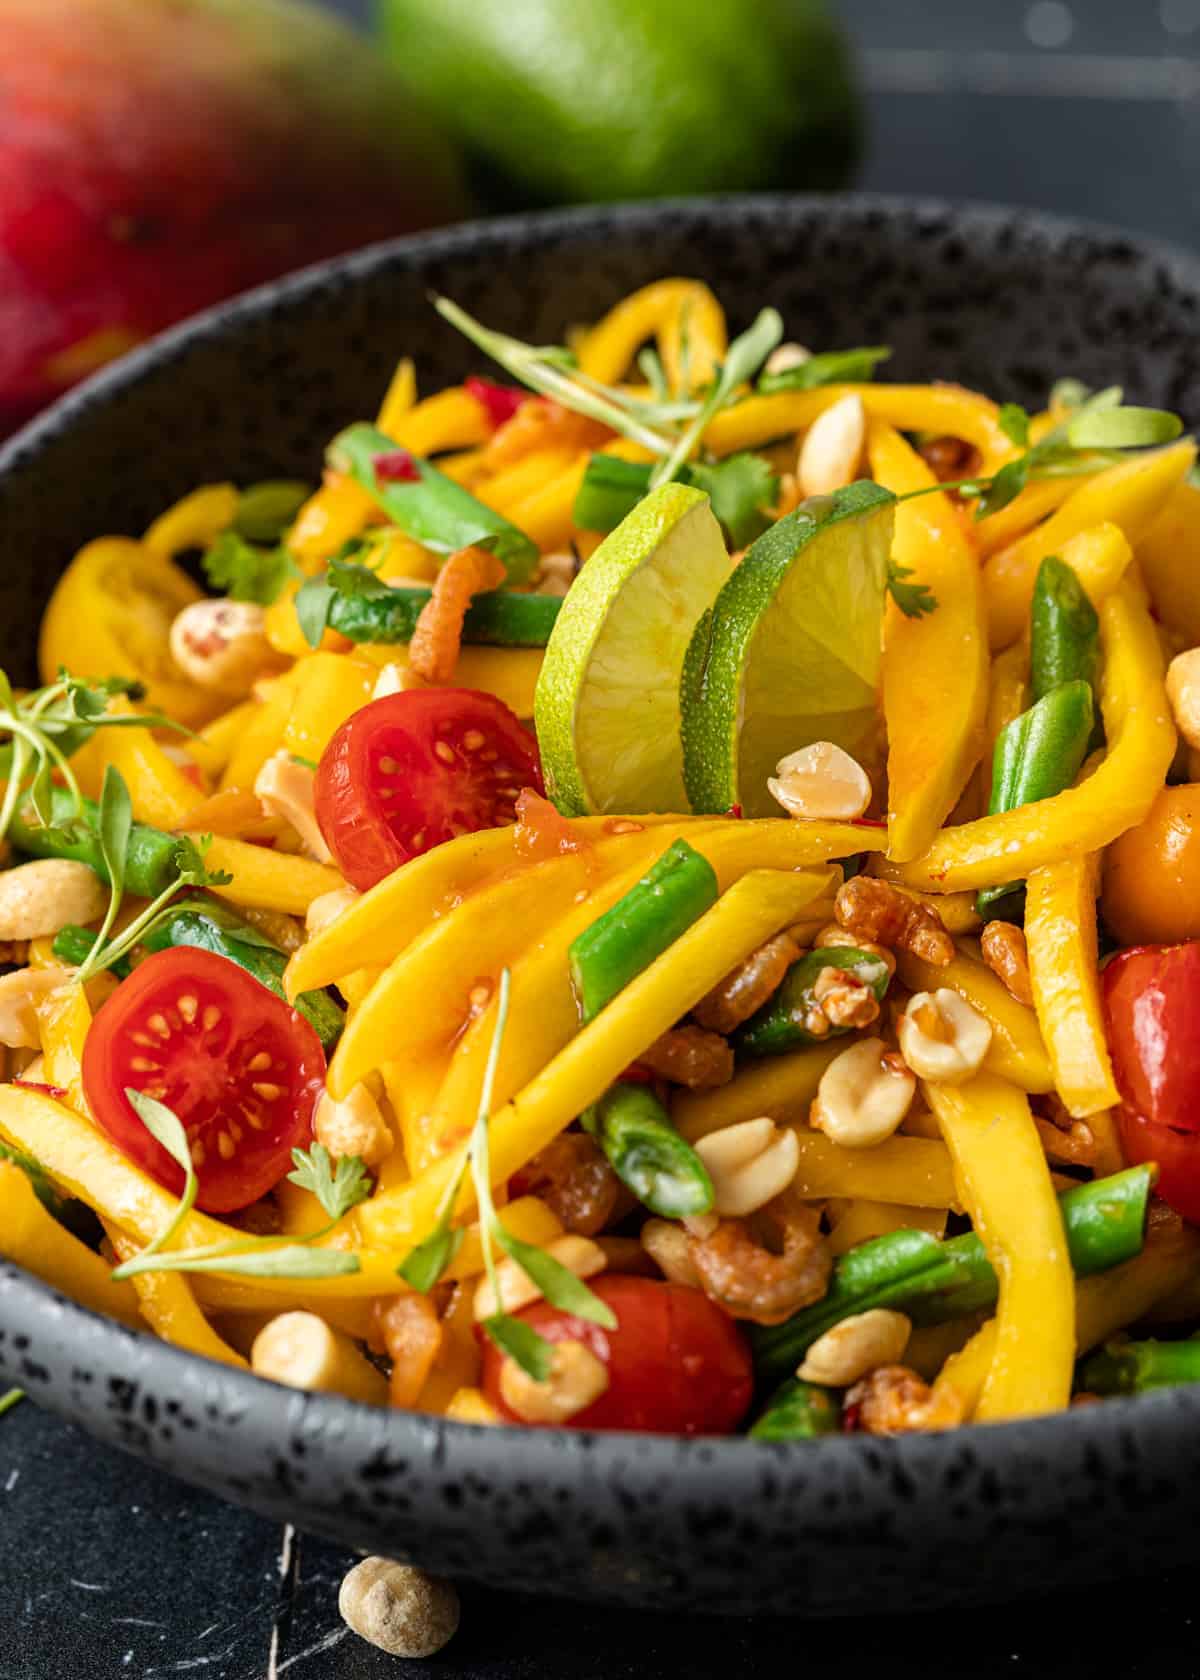 side view close up: green mango salad with mango fruit, tomatoes, beans, and peanuts in black bowl